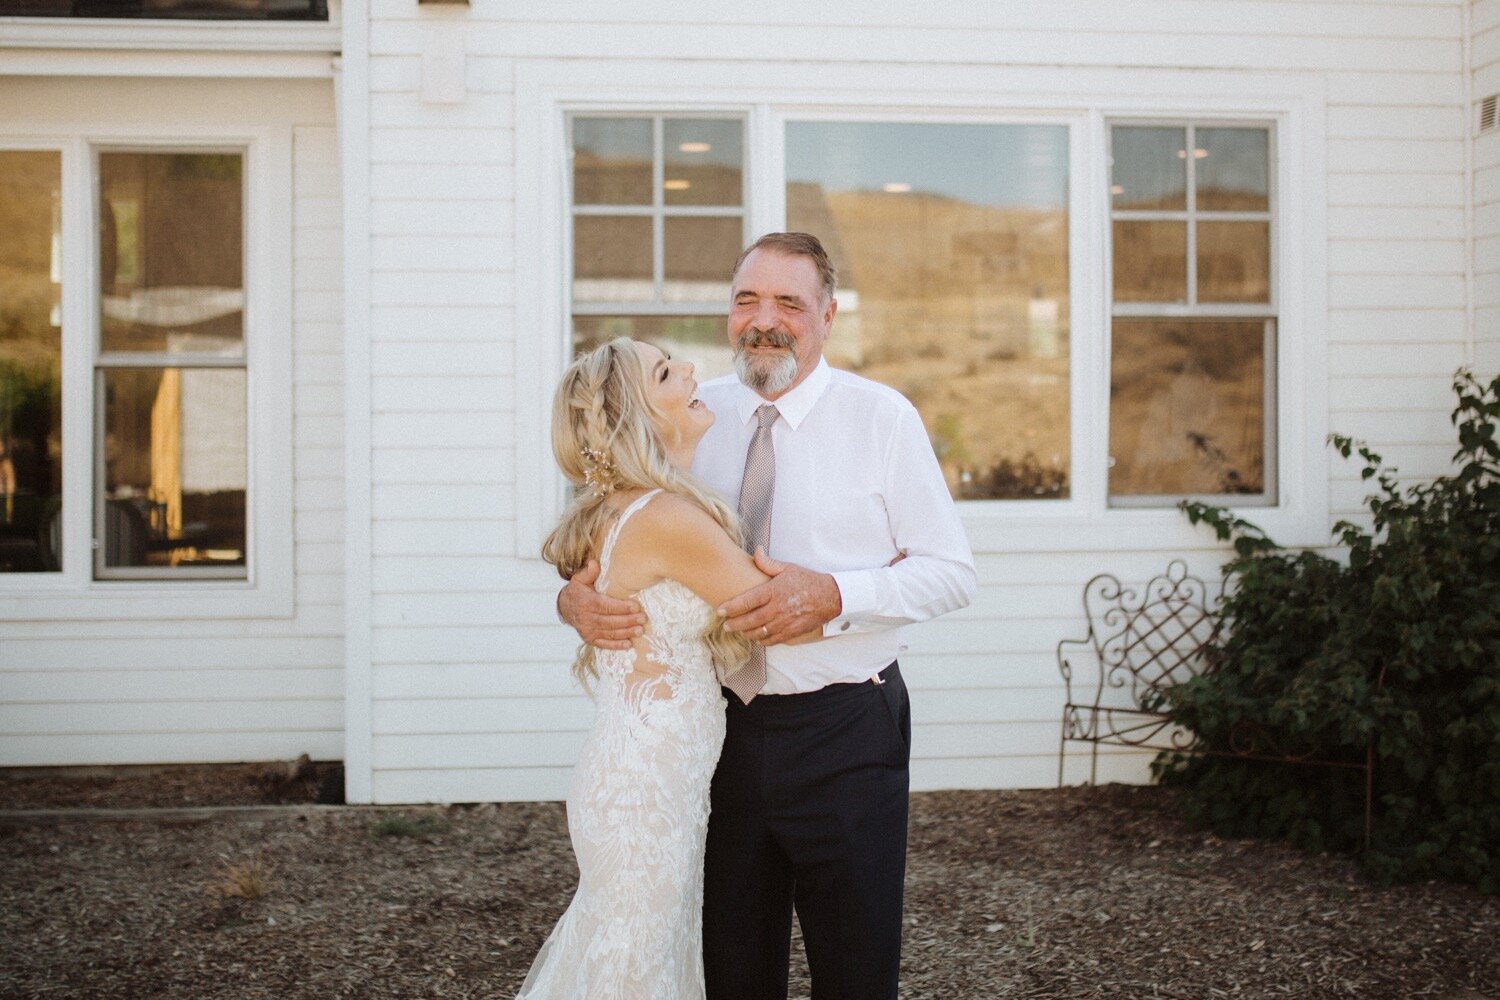 bride and father share an intimate moment during their first look at her higuera ranch wedding in san luis obispo. paso robles wedding photographer